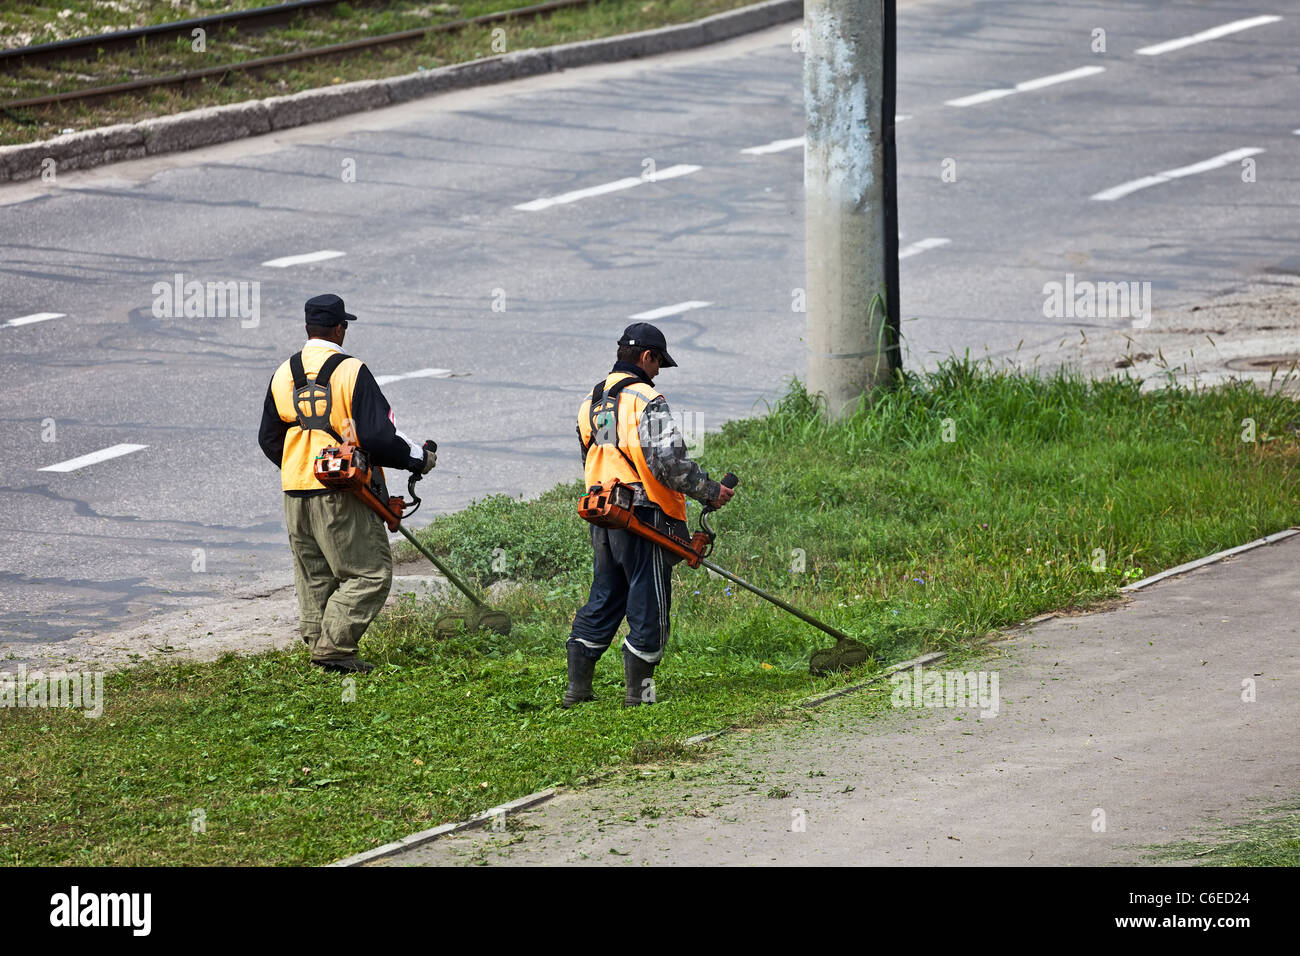 Men with lawn mower triming grass near a road. Stock Photo